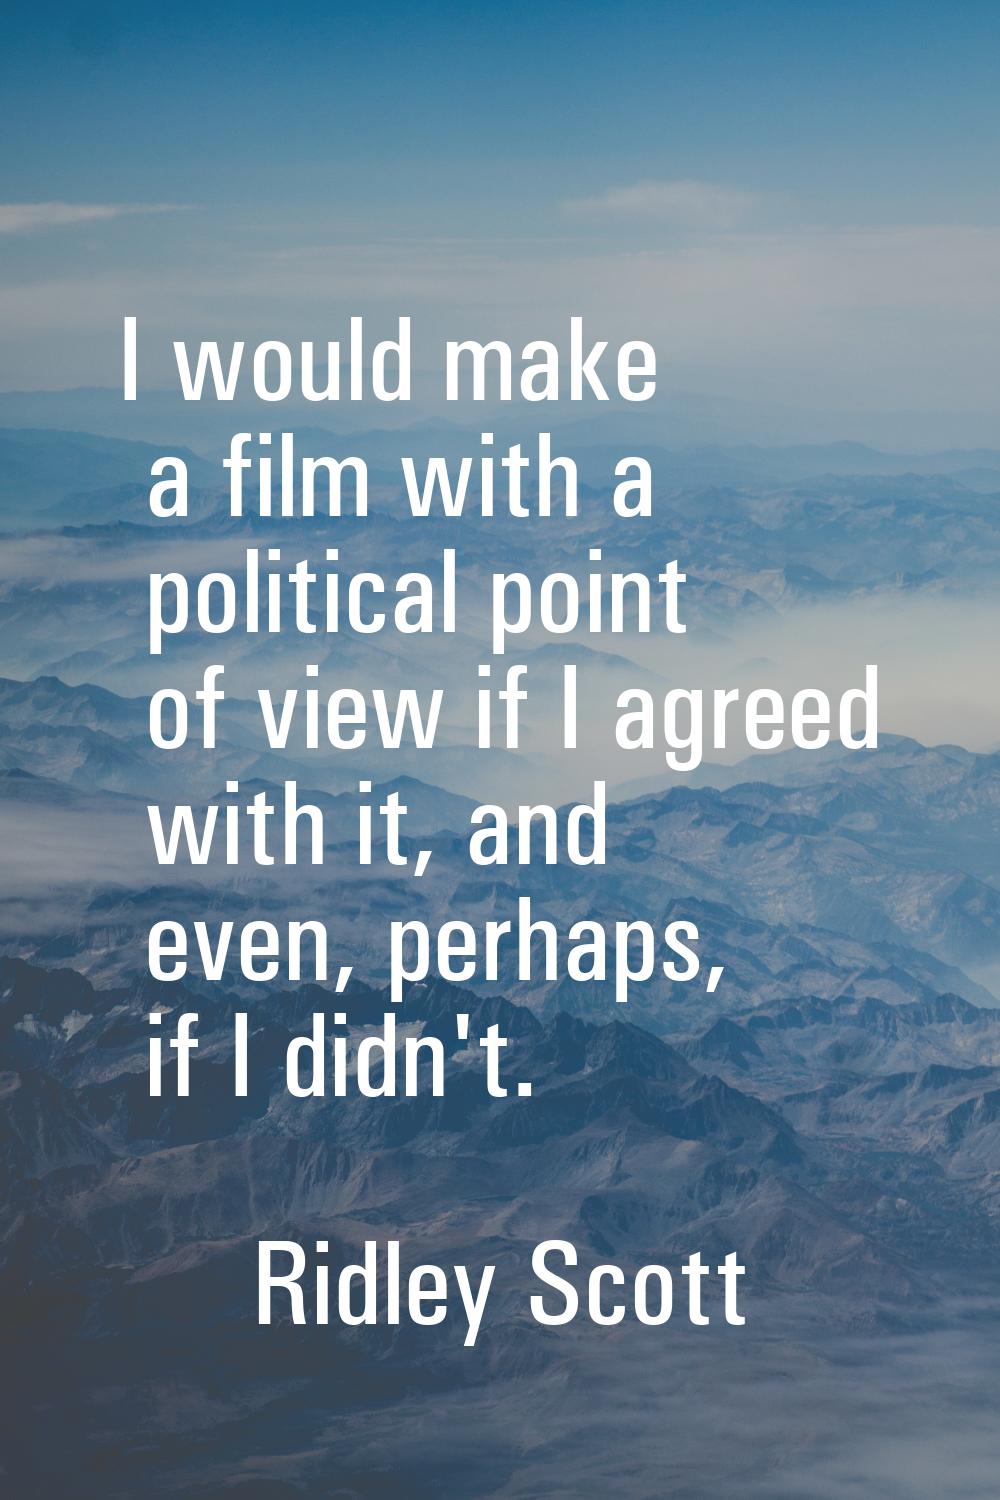 I would make a film with a political point of view if I agreed with it, and even, perhaps, if I did